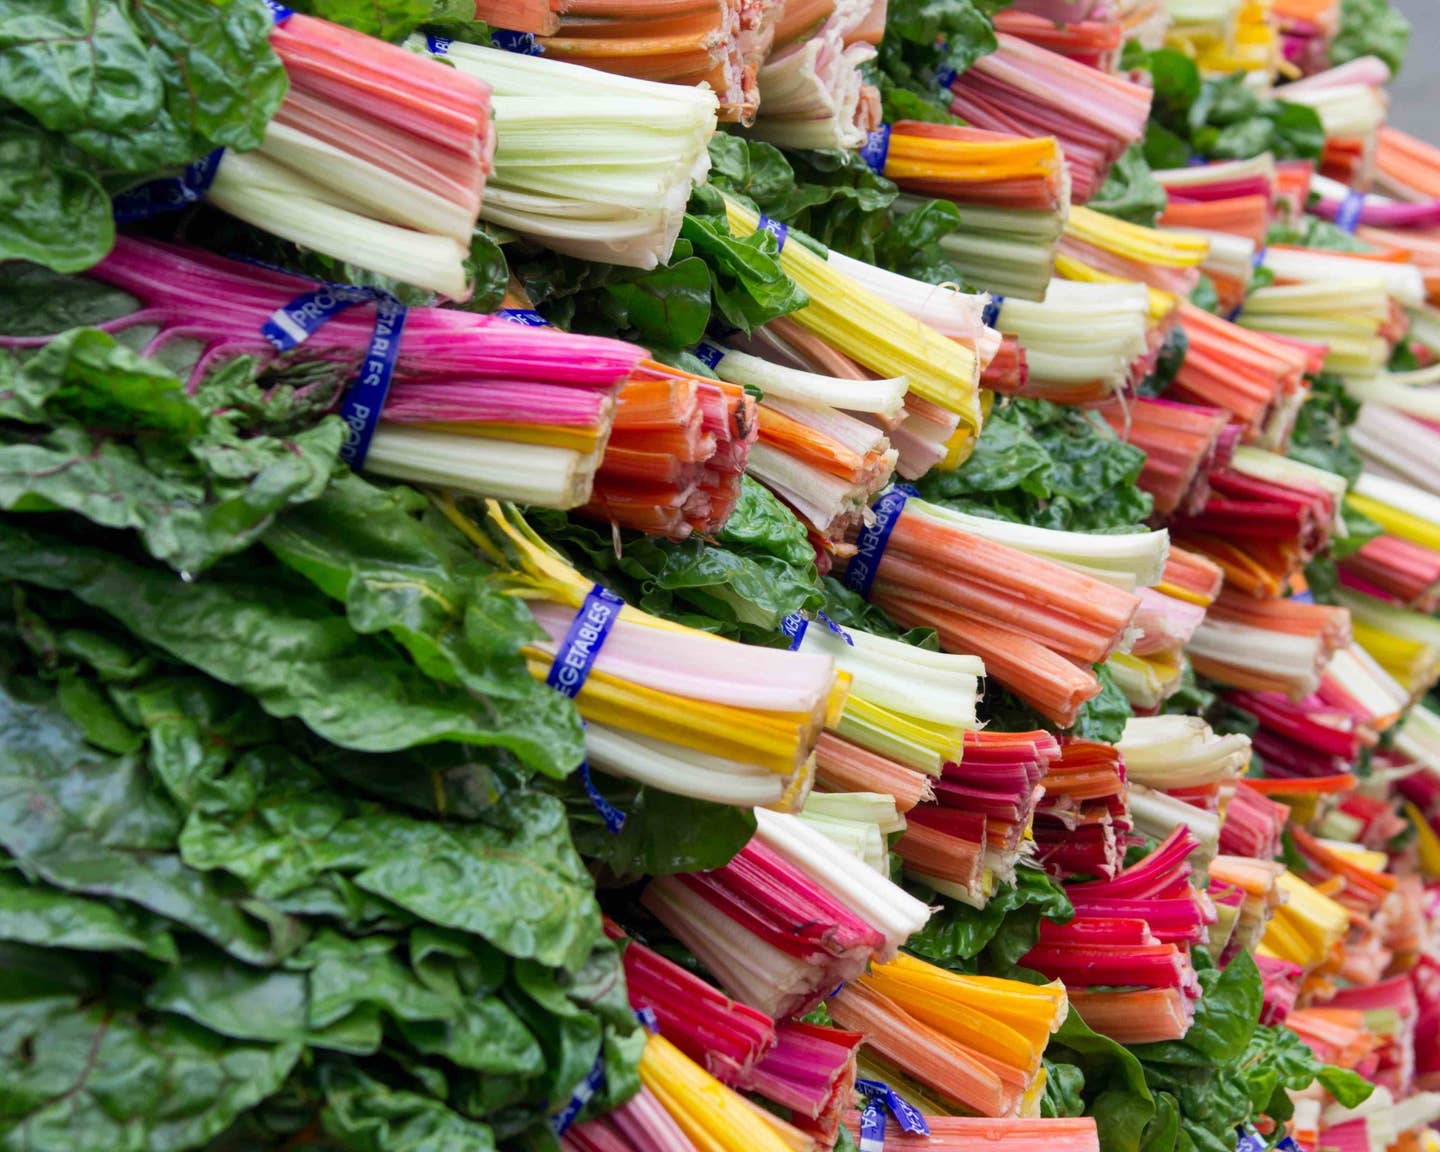 A display of colorful swiss chard at the farmers market